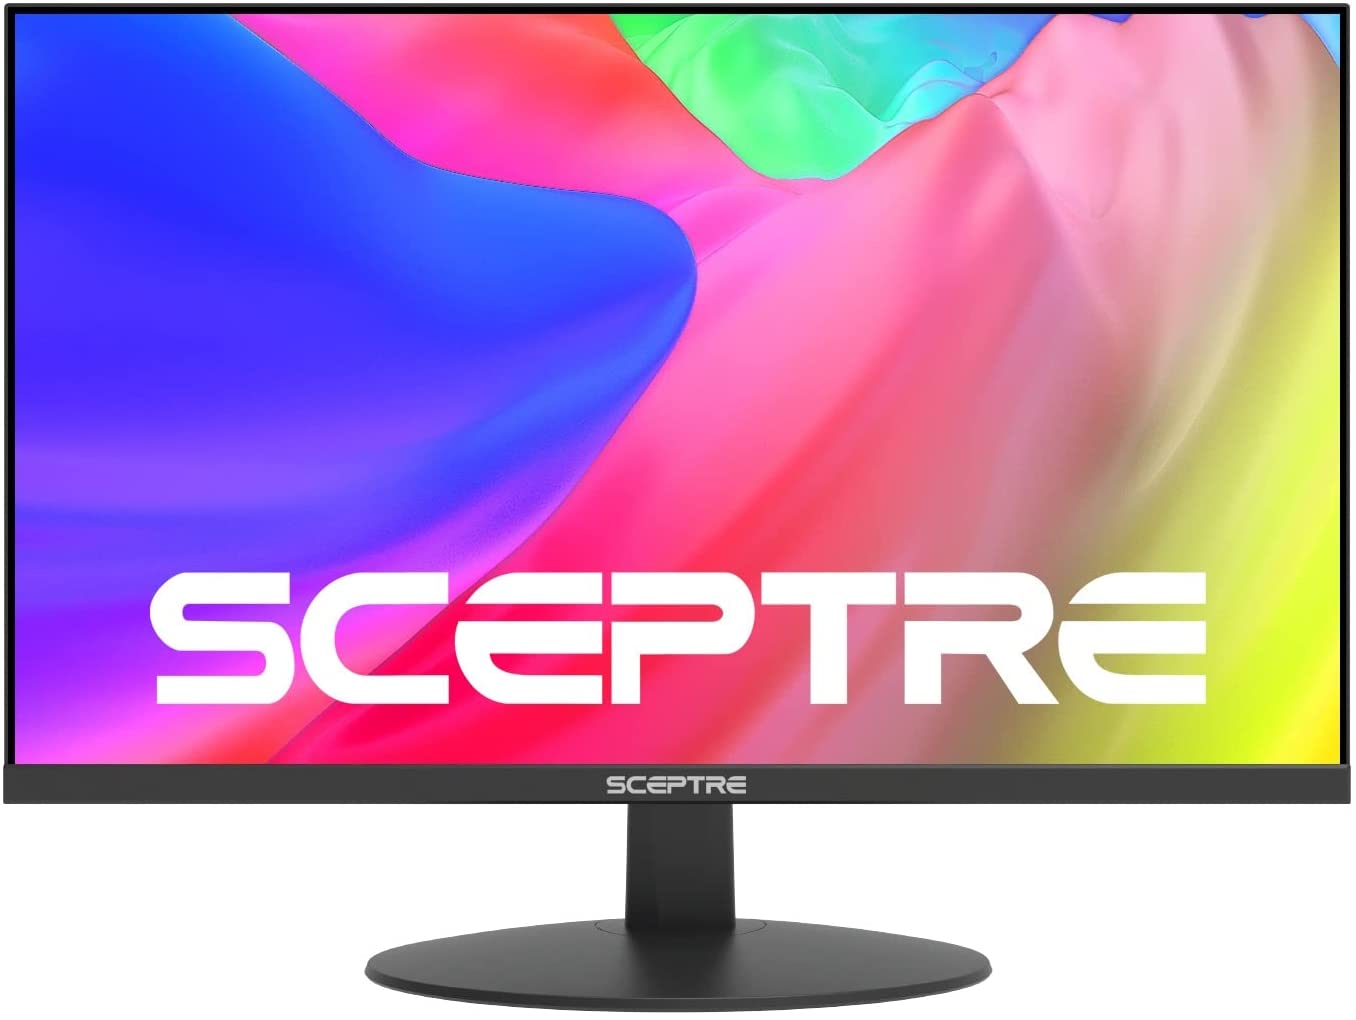 Sceptre IPS 27" IPS 75Hz 1080p Computer Monitor with HDMI, VGA - Built-in Speakers E275W-FPT - Pro-Distributing